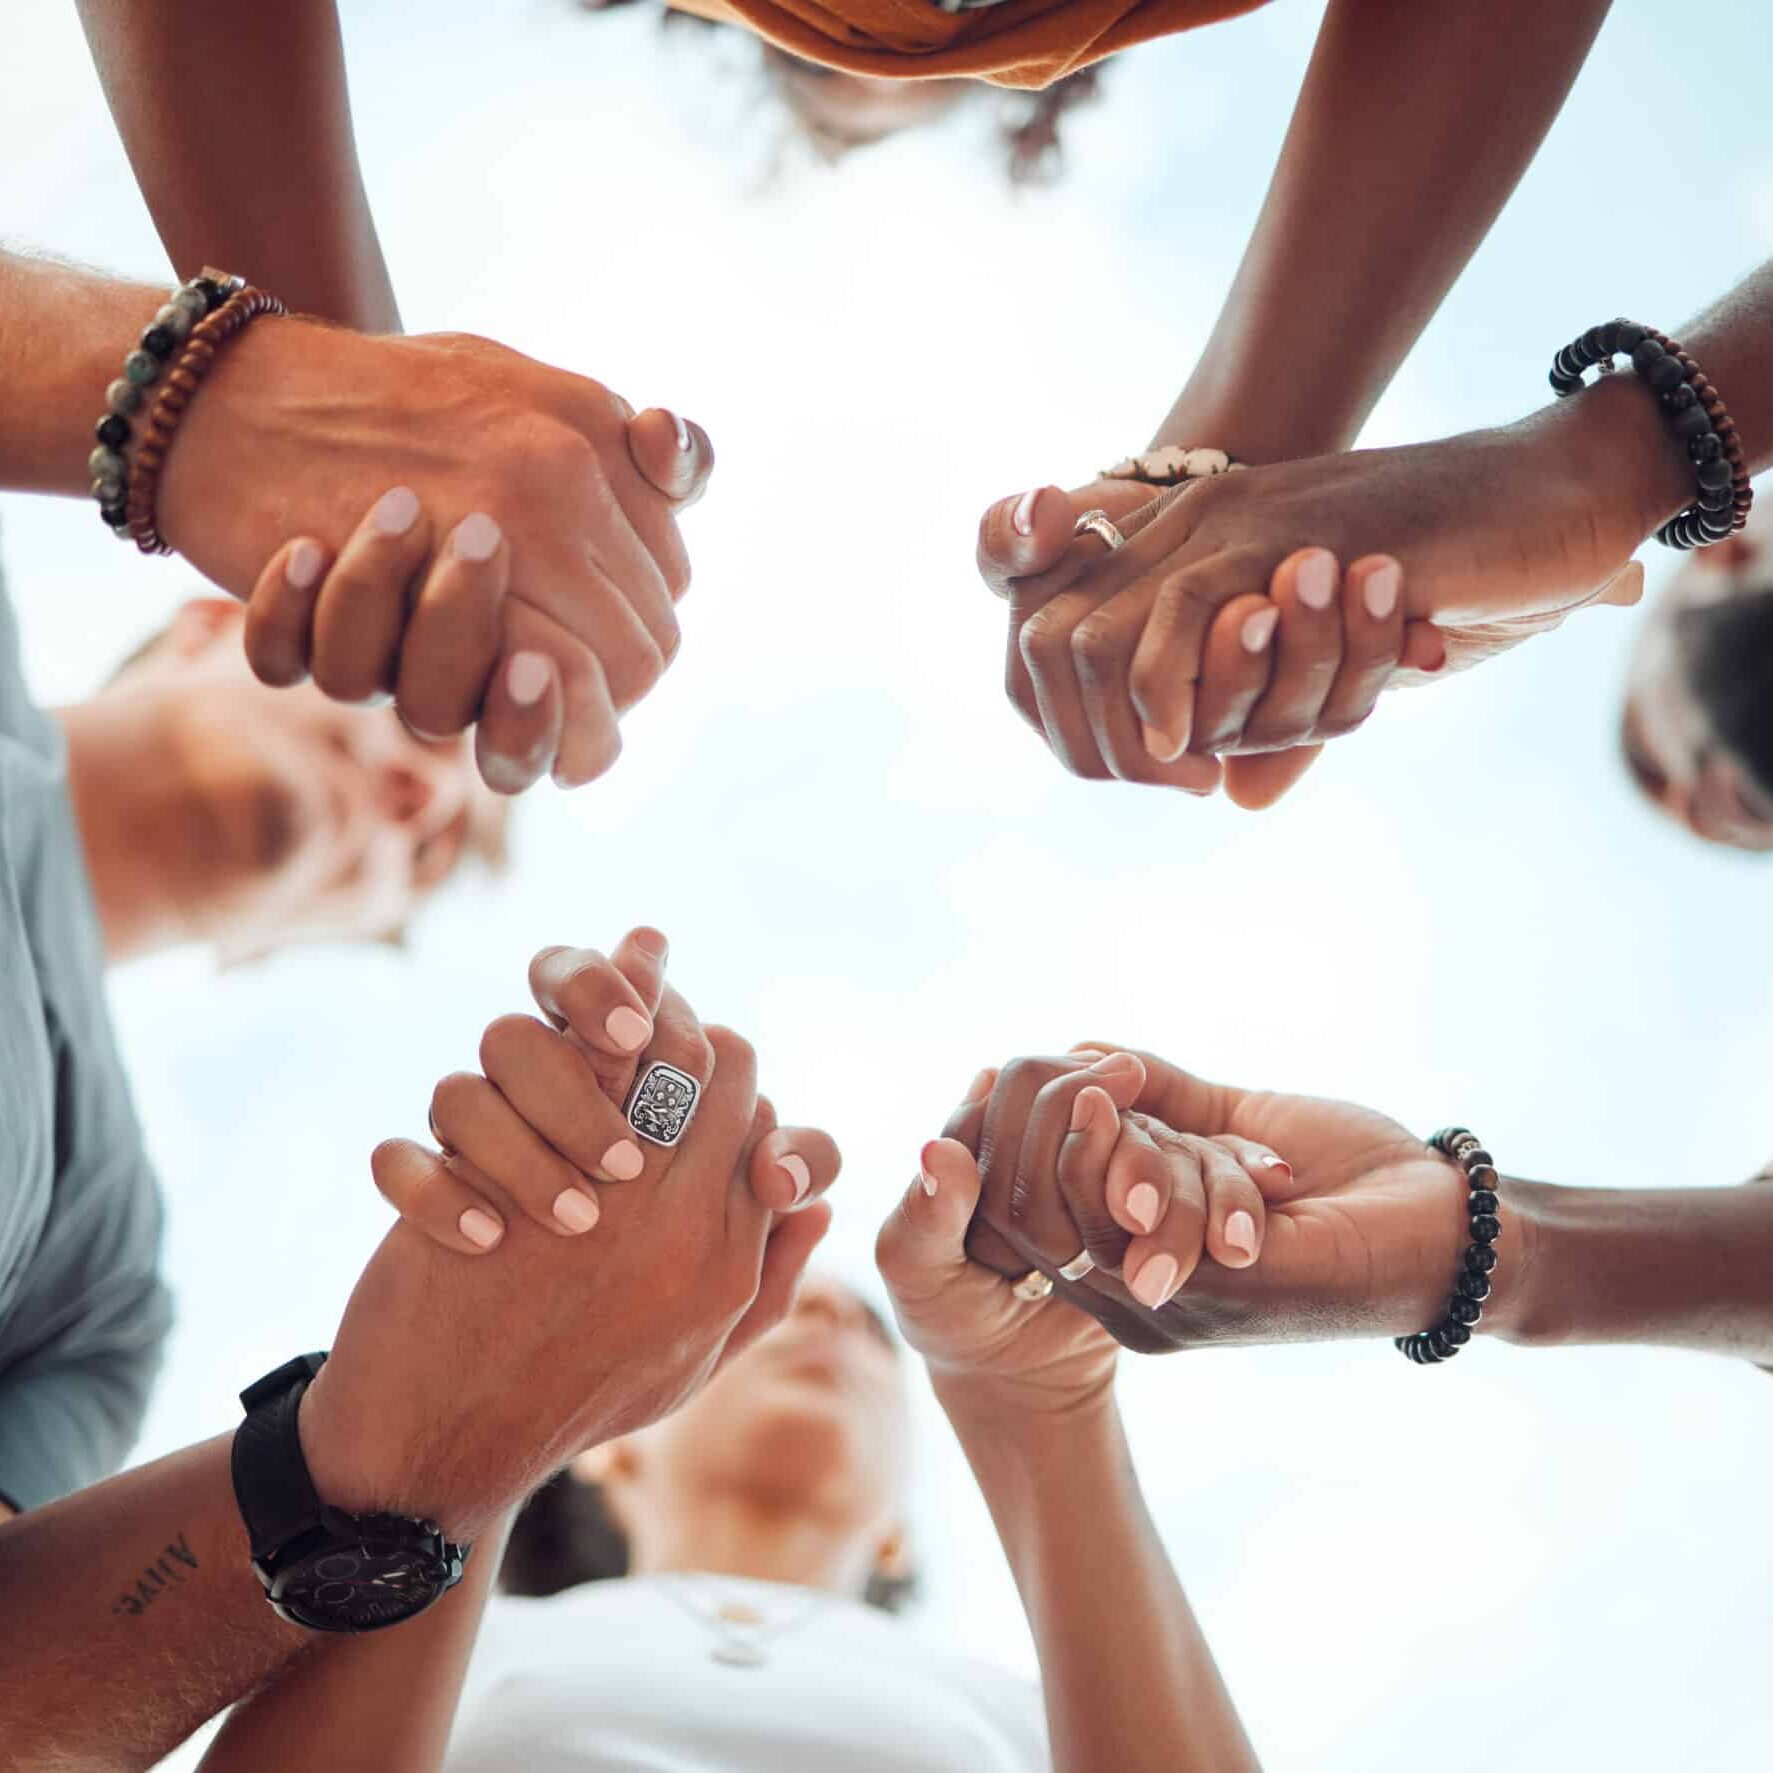 Holding hands, support and friends praying for spiritual growth, community and gratitude together with sky from below. Group of people in partnership for hope, love and human faith in connection.